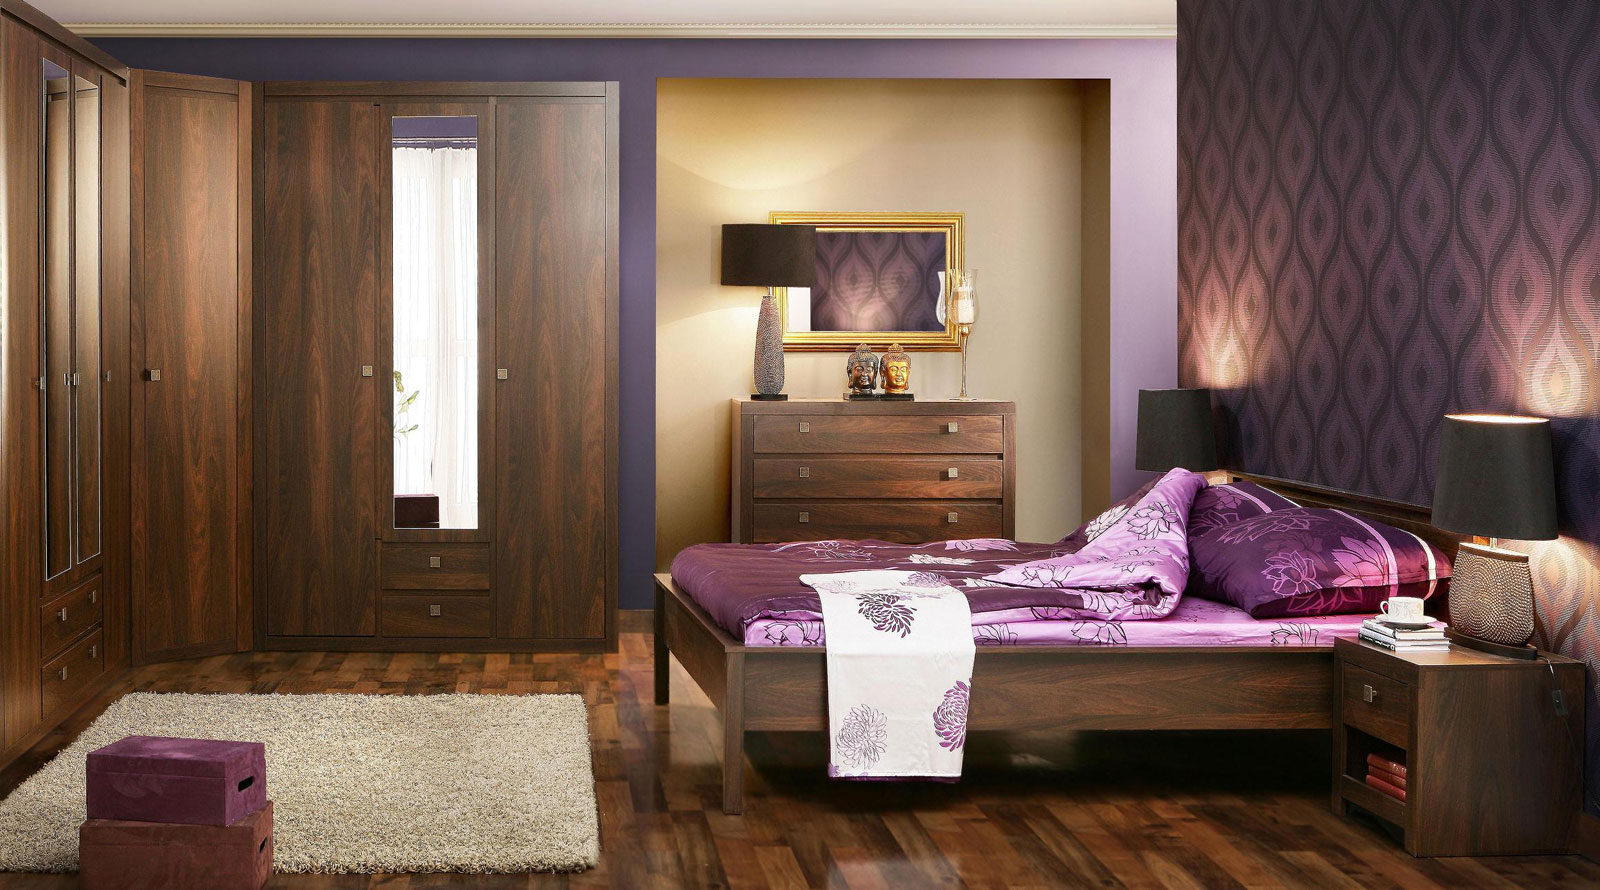 Wooden Flooring Combined Breathtaking Wooden Flooring In Bedroom Combined With Interior Design Styles Furnished With Medium Bed And Drawers Completed With Night Lamps Plus White Rug Interior Design Composing The Classic Or Modern Interior Design Styles